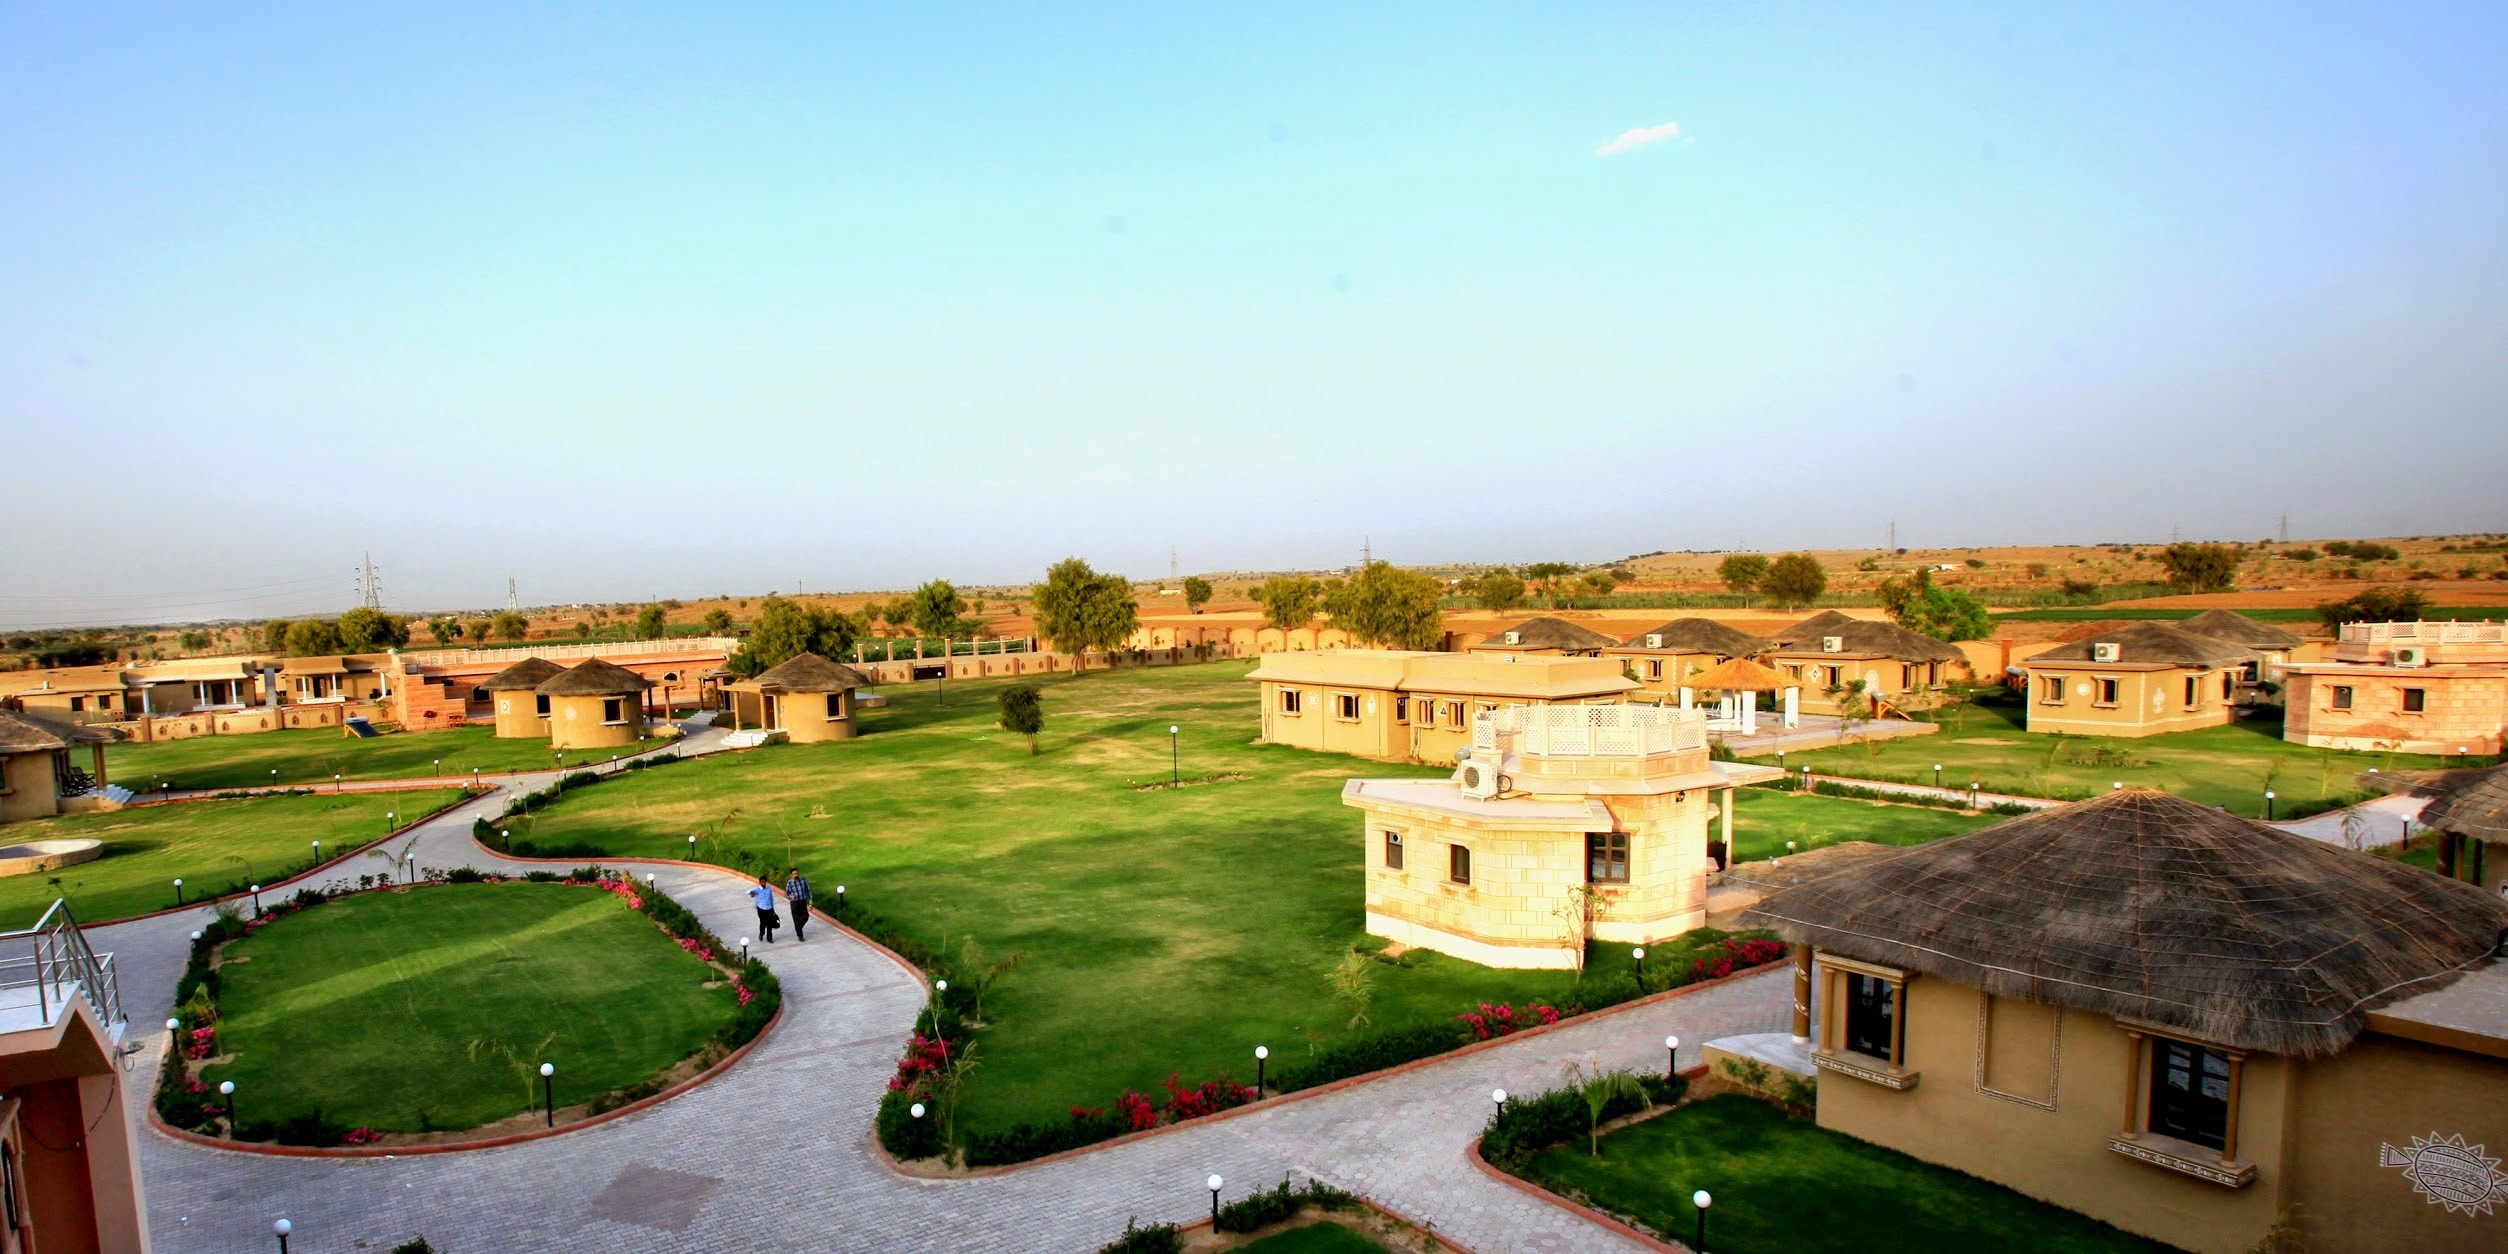 Reasons why Thar Oasis is perfect holiday destination?